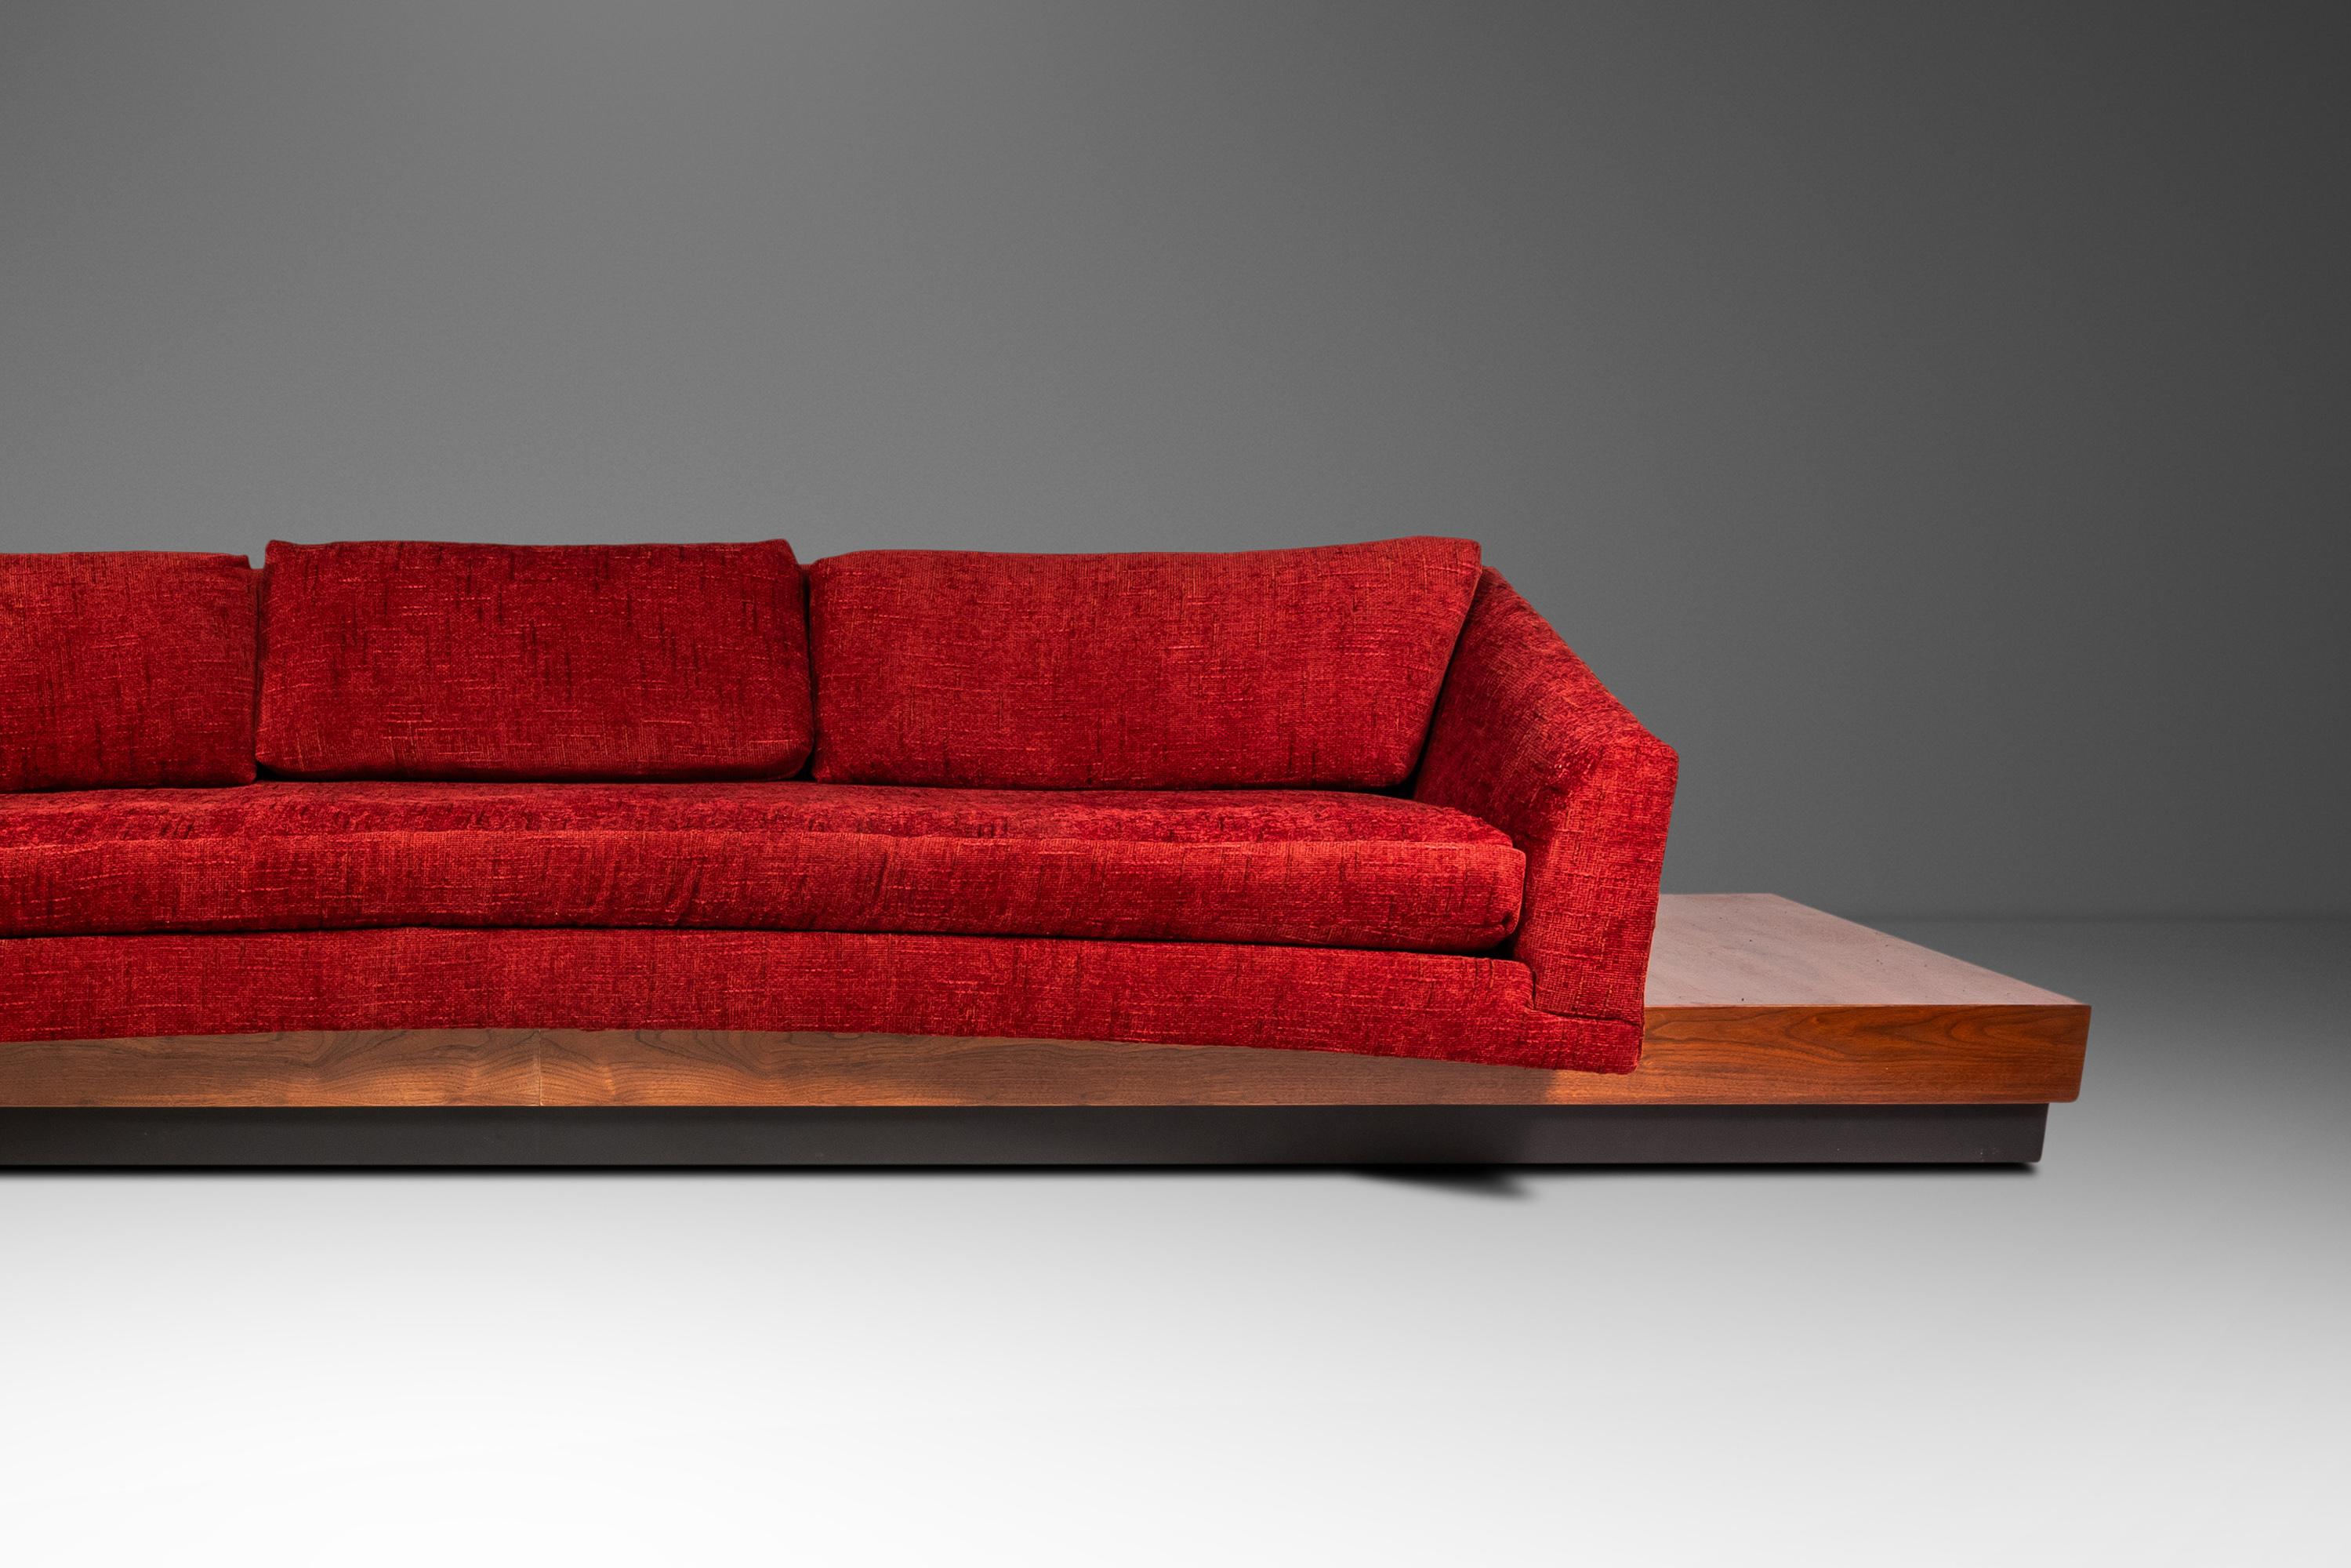 Expansive 12-Foot Platform Sofa by Adrian Pearsall for Craft Associates, 1960s For Sale 10